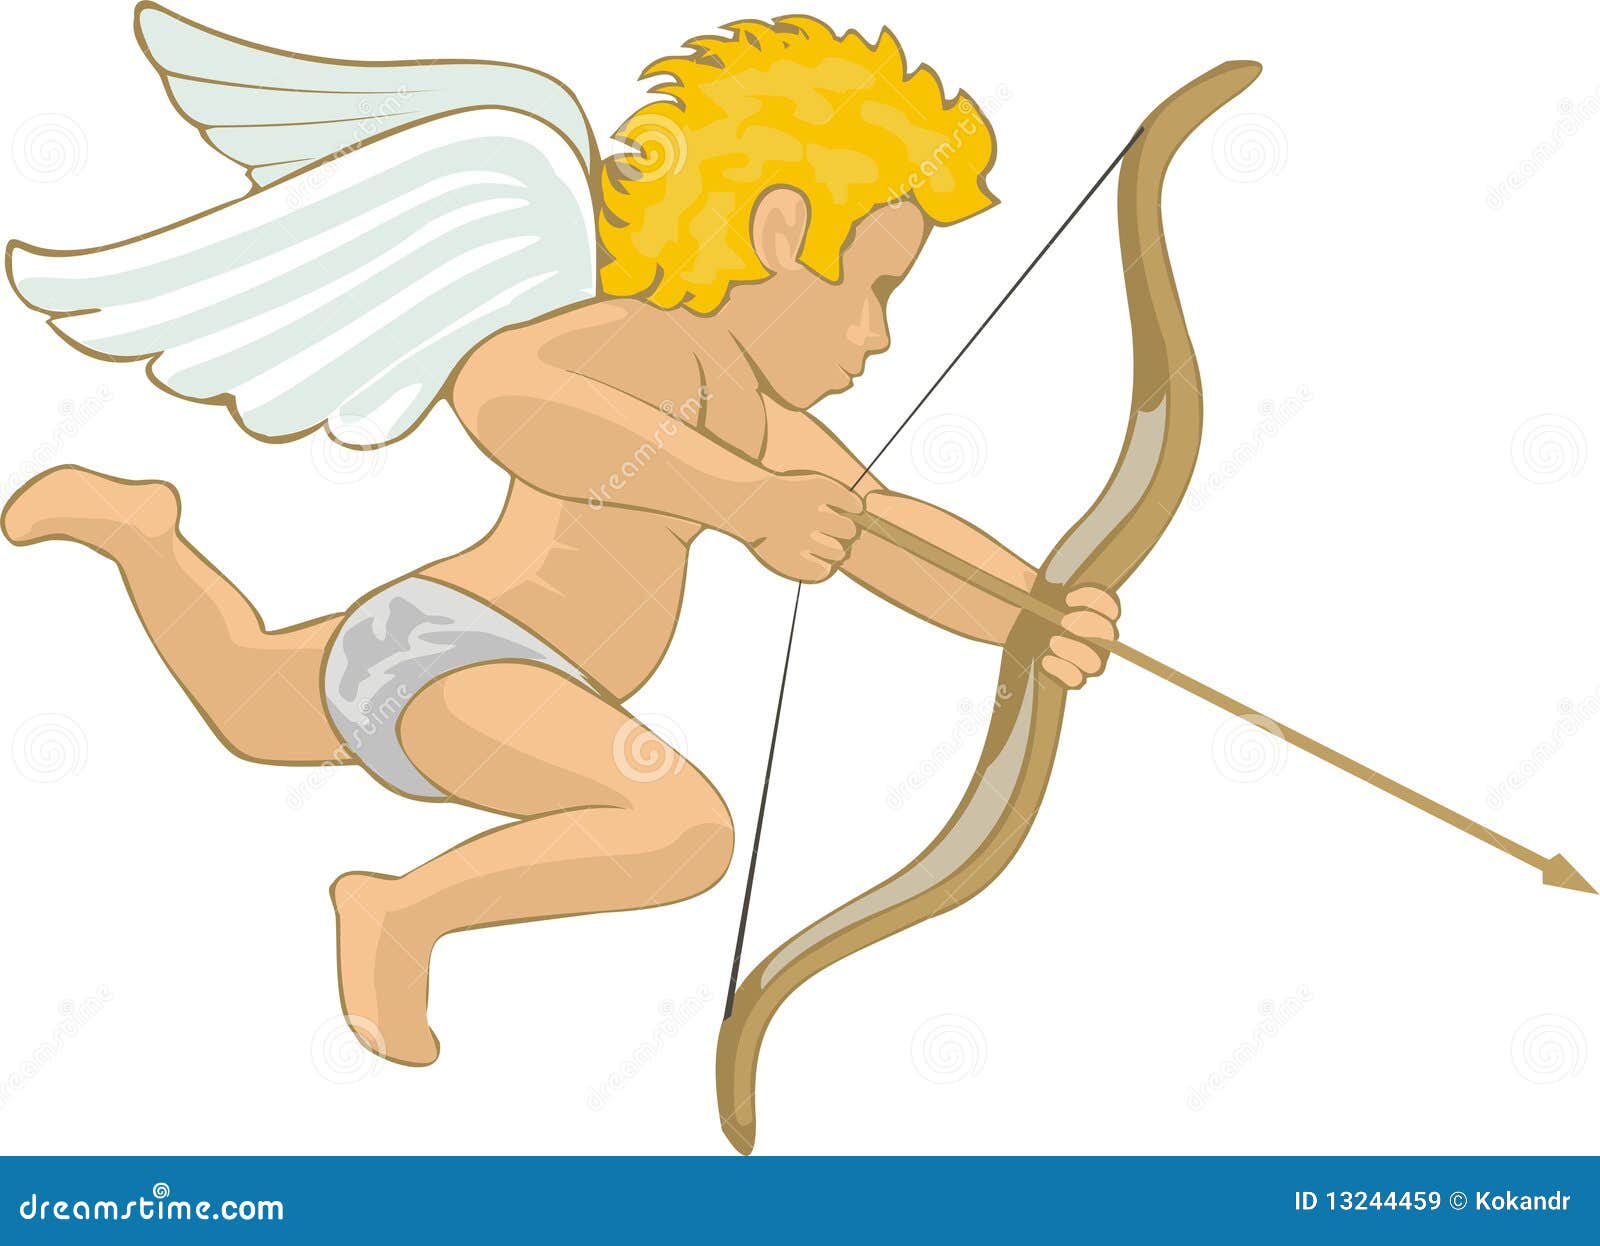 Small Pictures Of Cupid 6